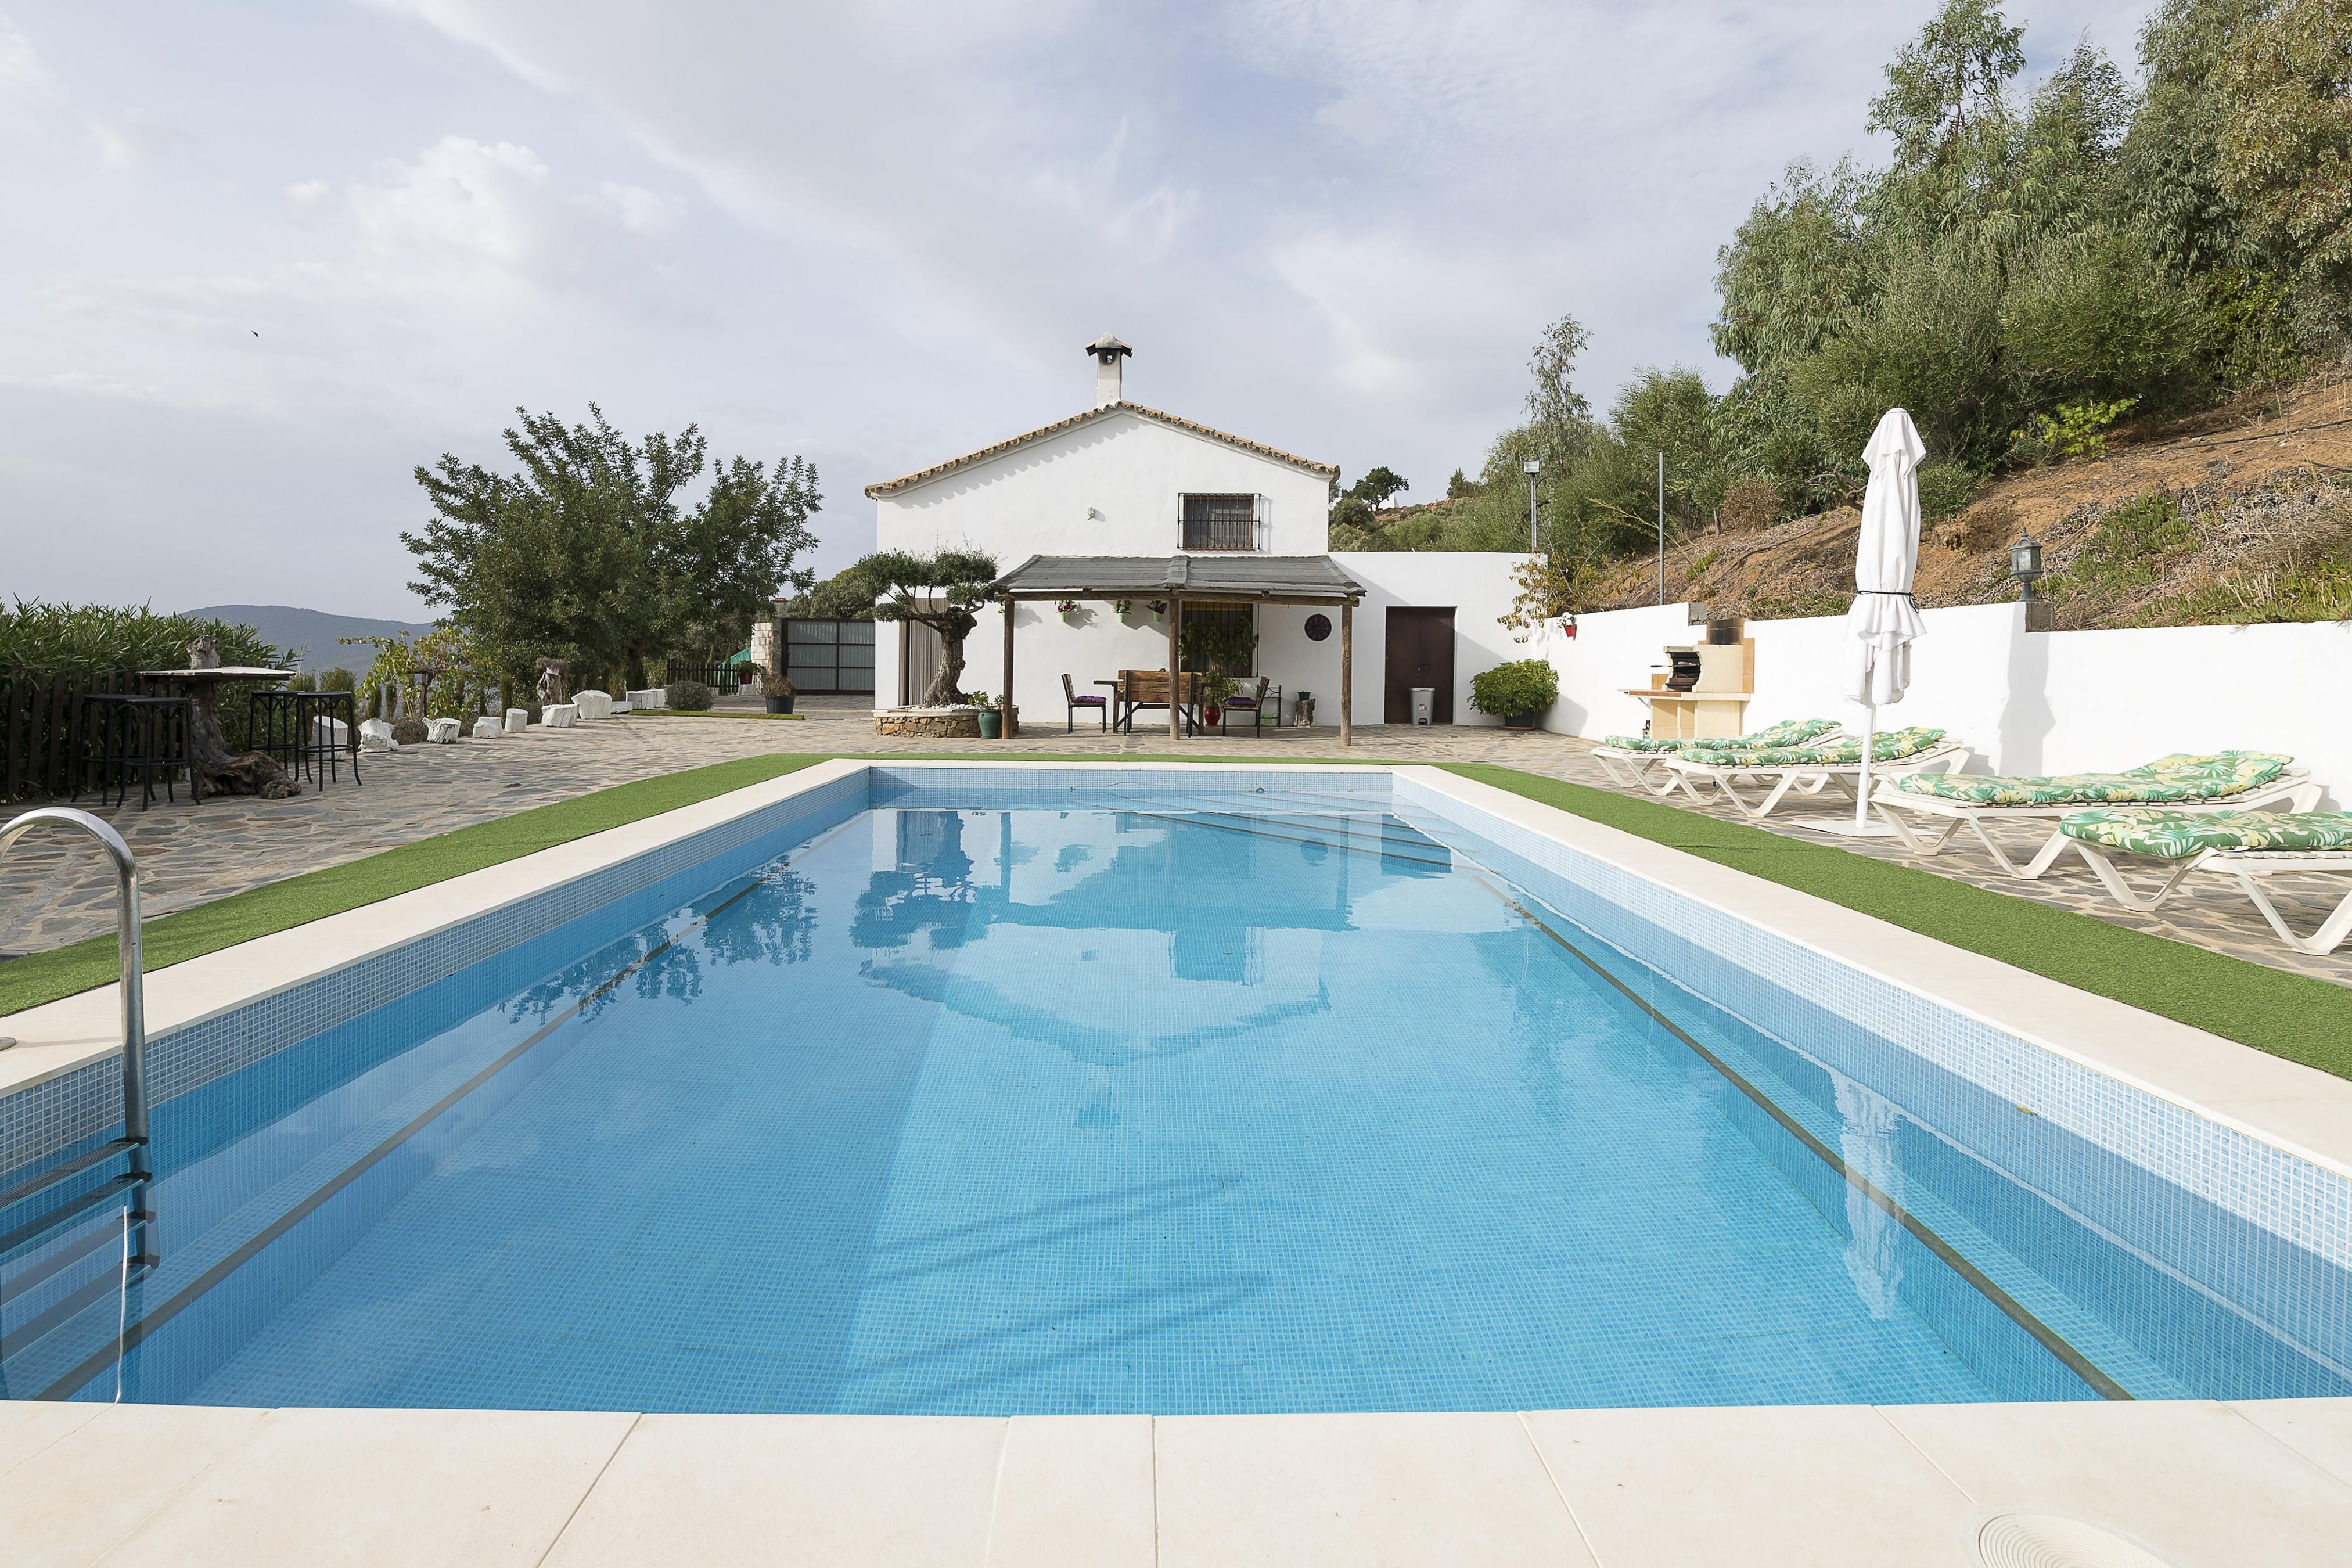 Property Image 2 - LA BODEGUILLA DEL CONDE - Villa with private pool and stunning views of the reservoir and the mountains. F